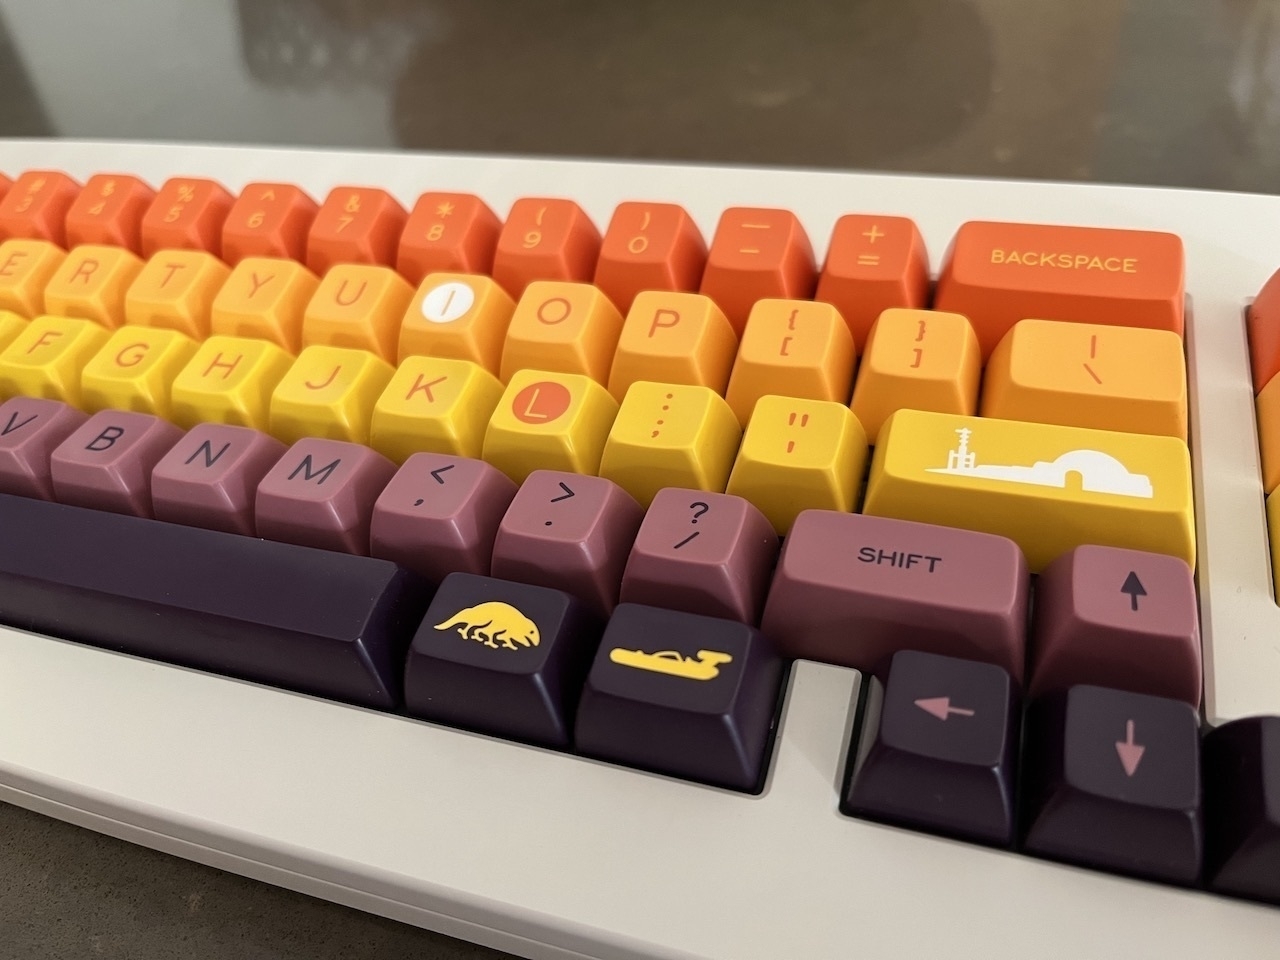 Right side of Class65 keyboard with Tatooine keycaps